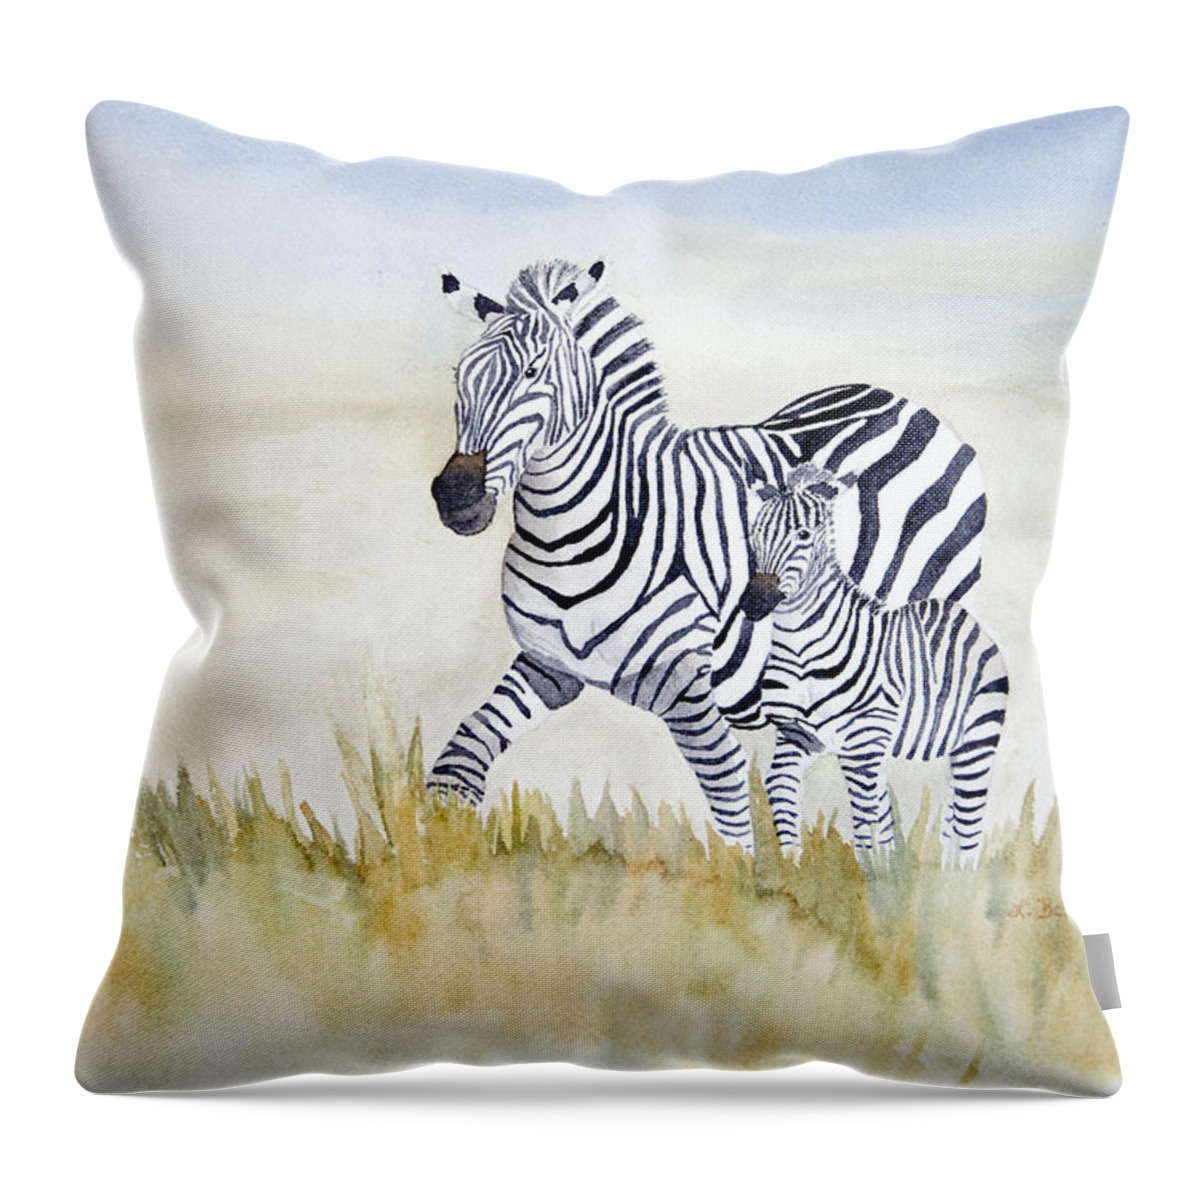 Zebra Throw Pillow featuring the painting Zebra Family by Laurel Best